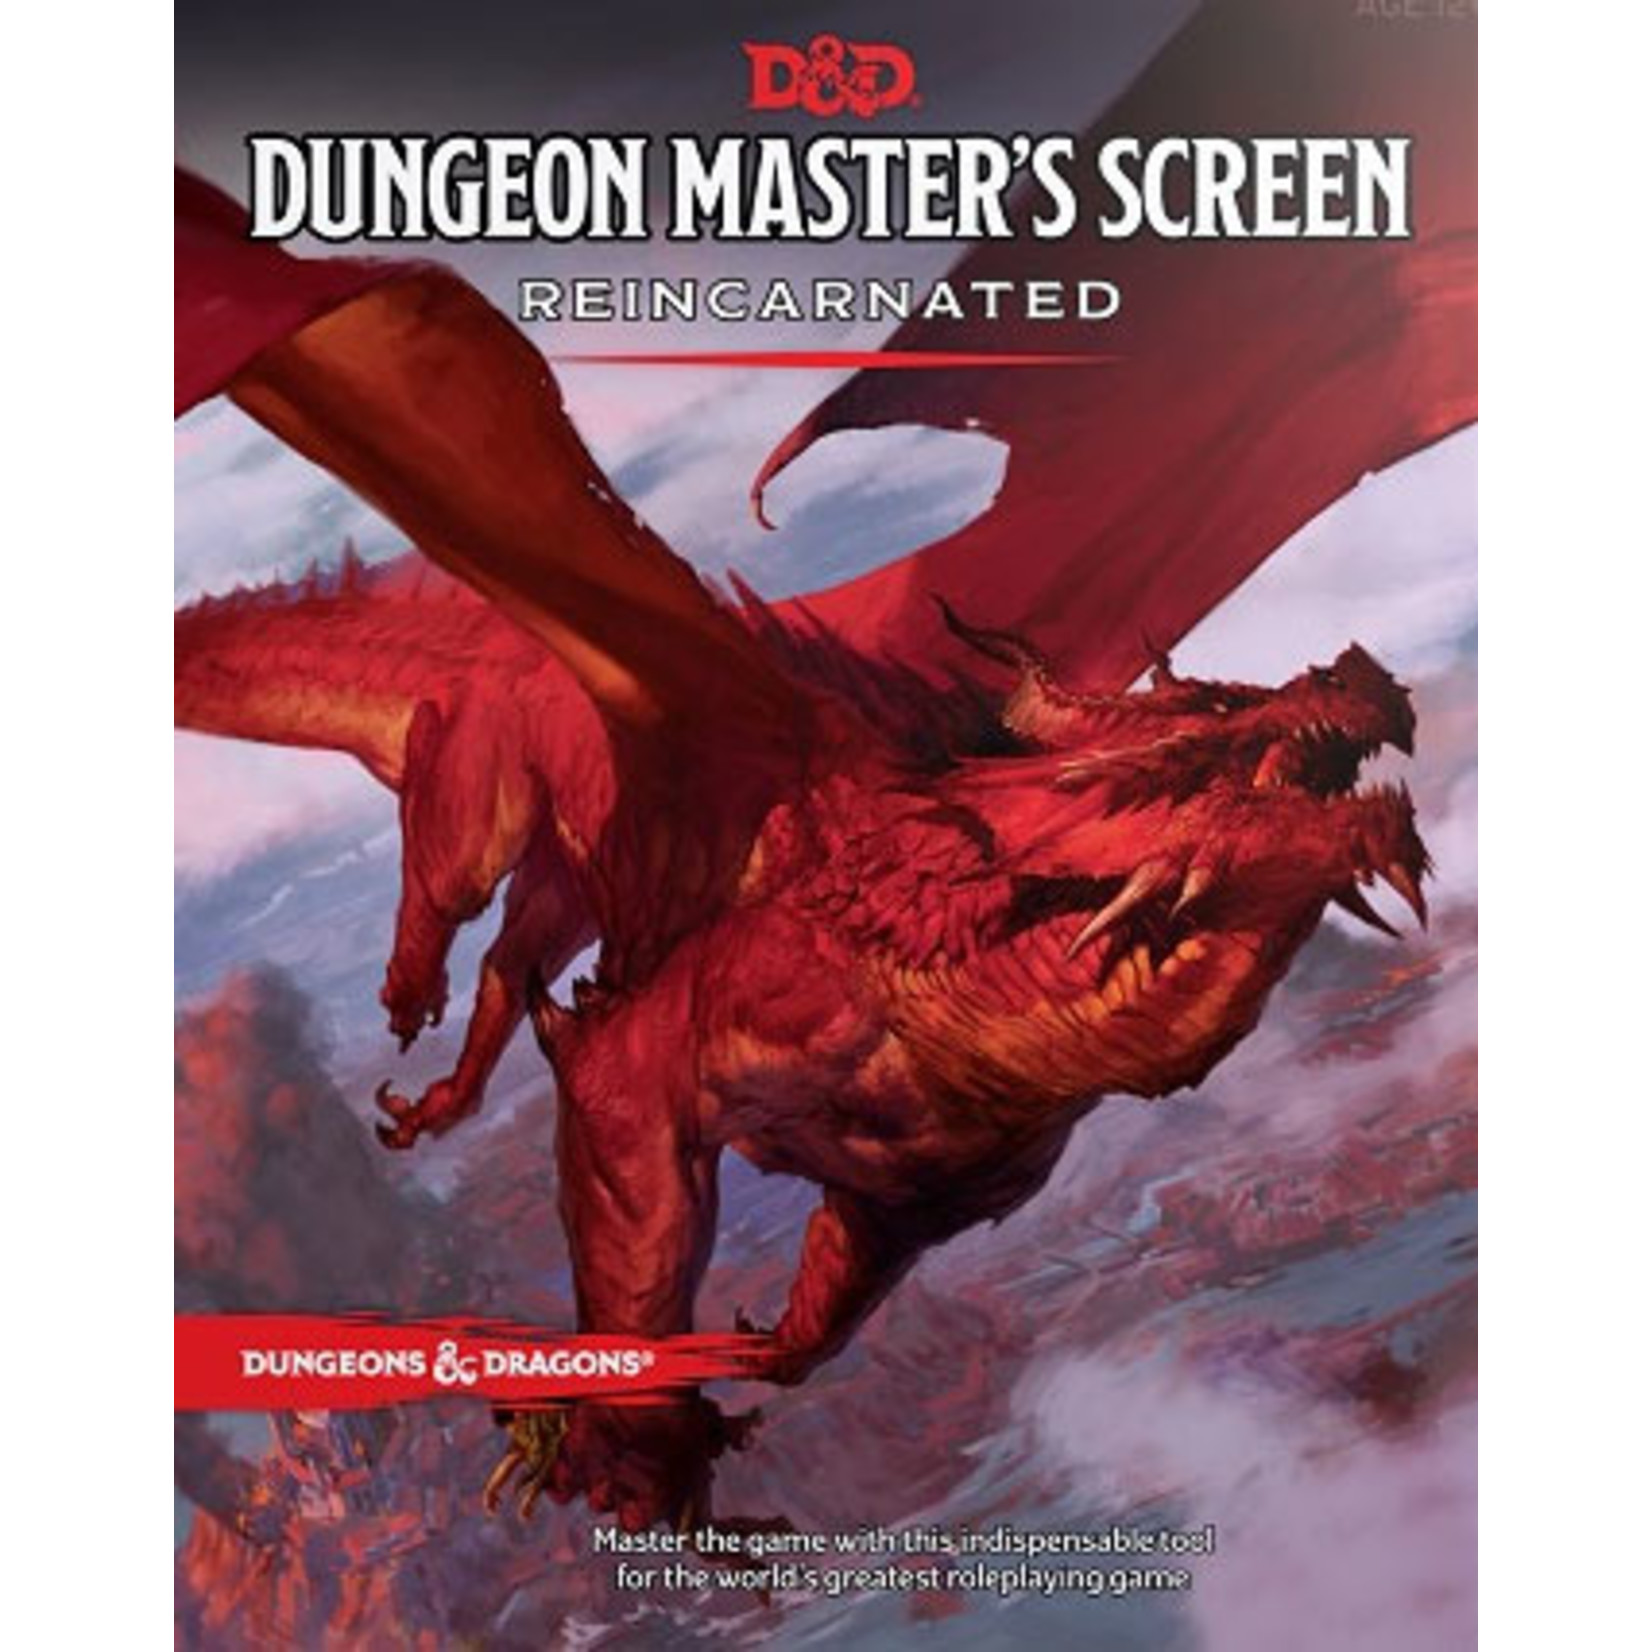 D&D Dungeons and Dragons RPG: Dungeon Master's Screen Reincarnated